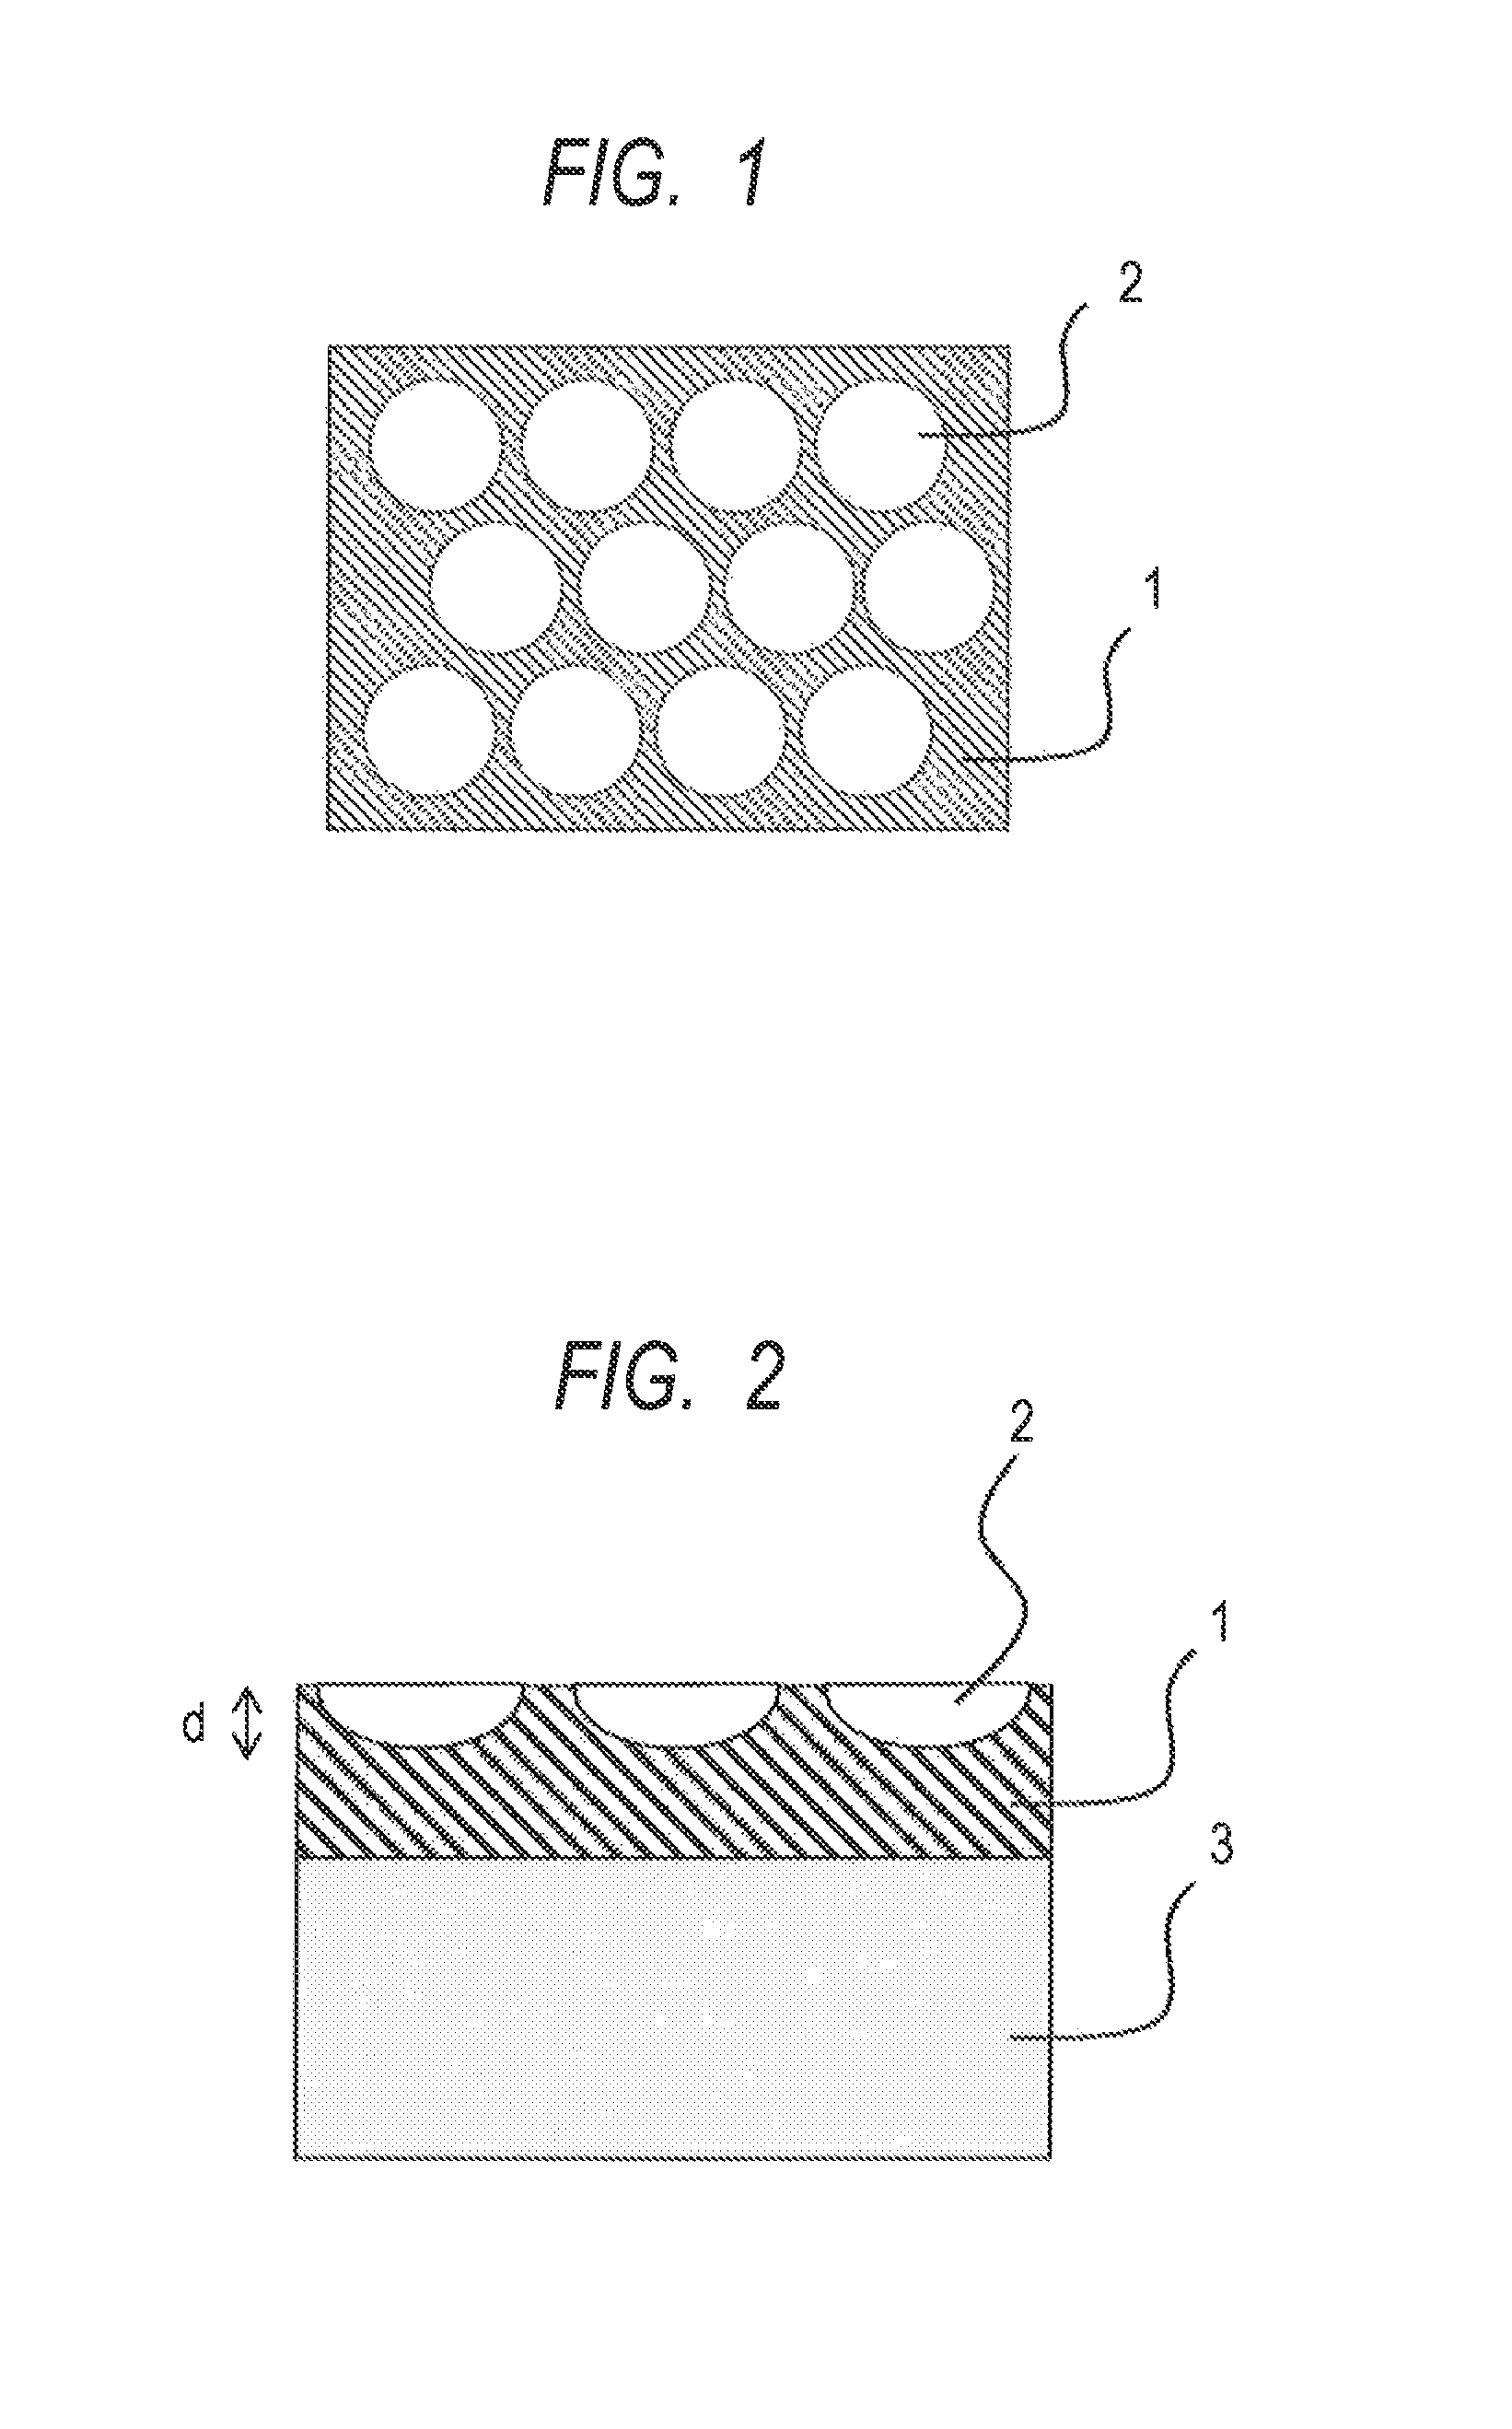 Transfer member for electrophotography and electrophotographic image forming apparatus